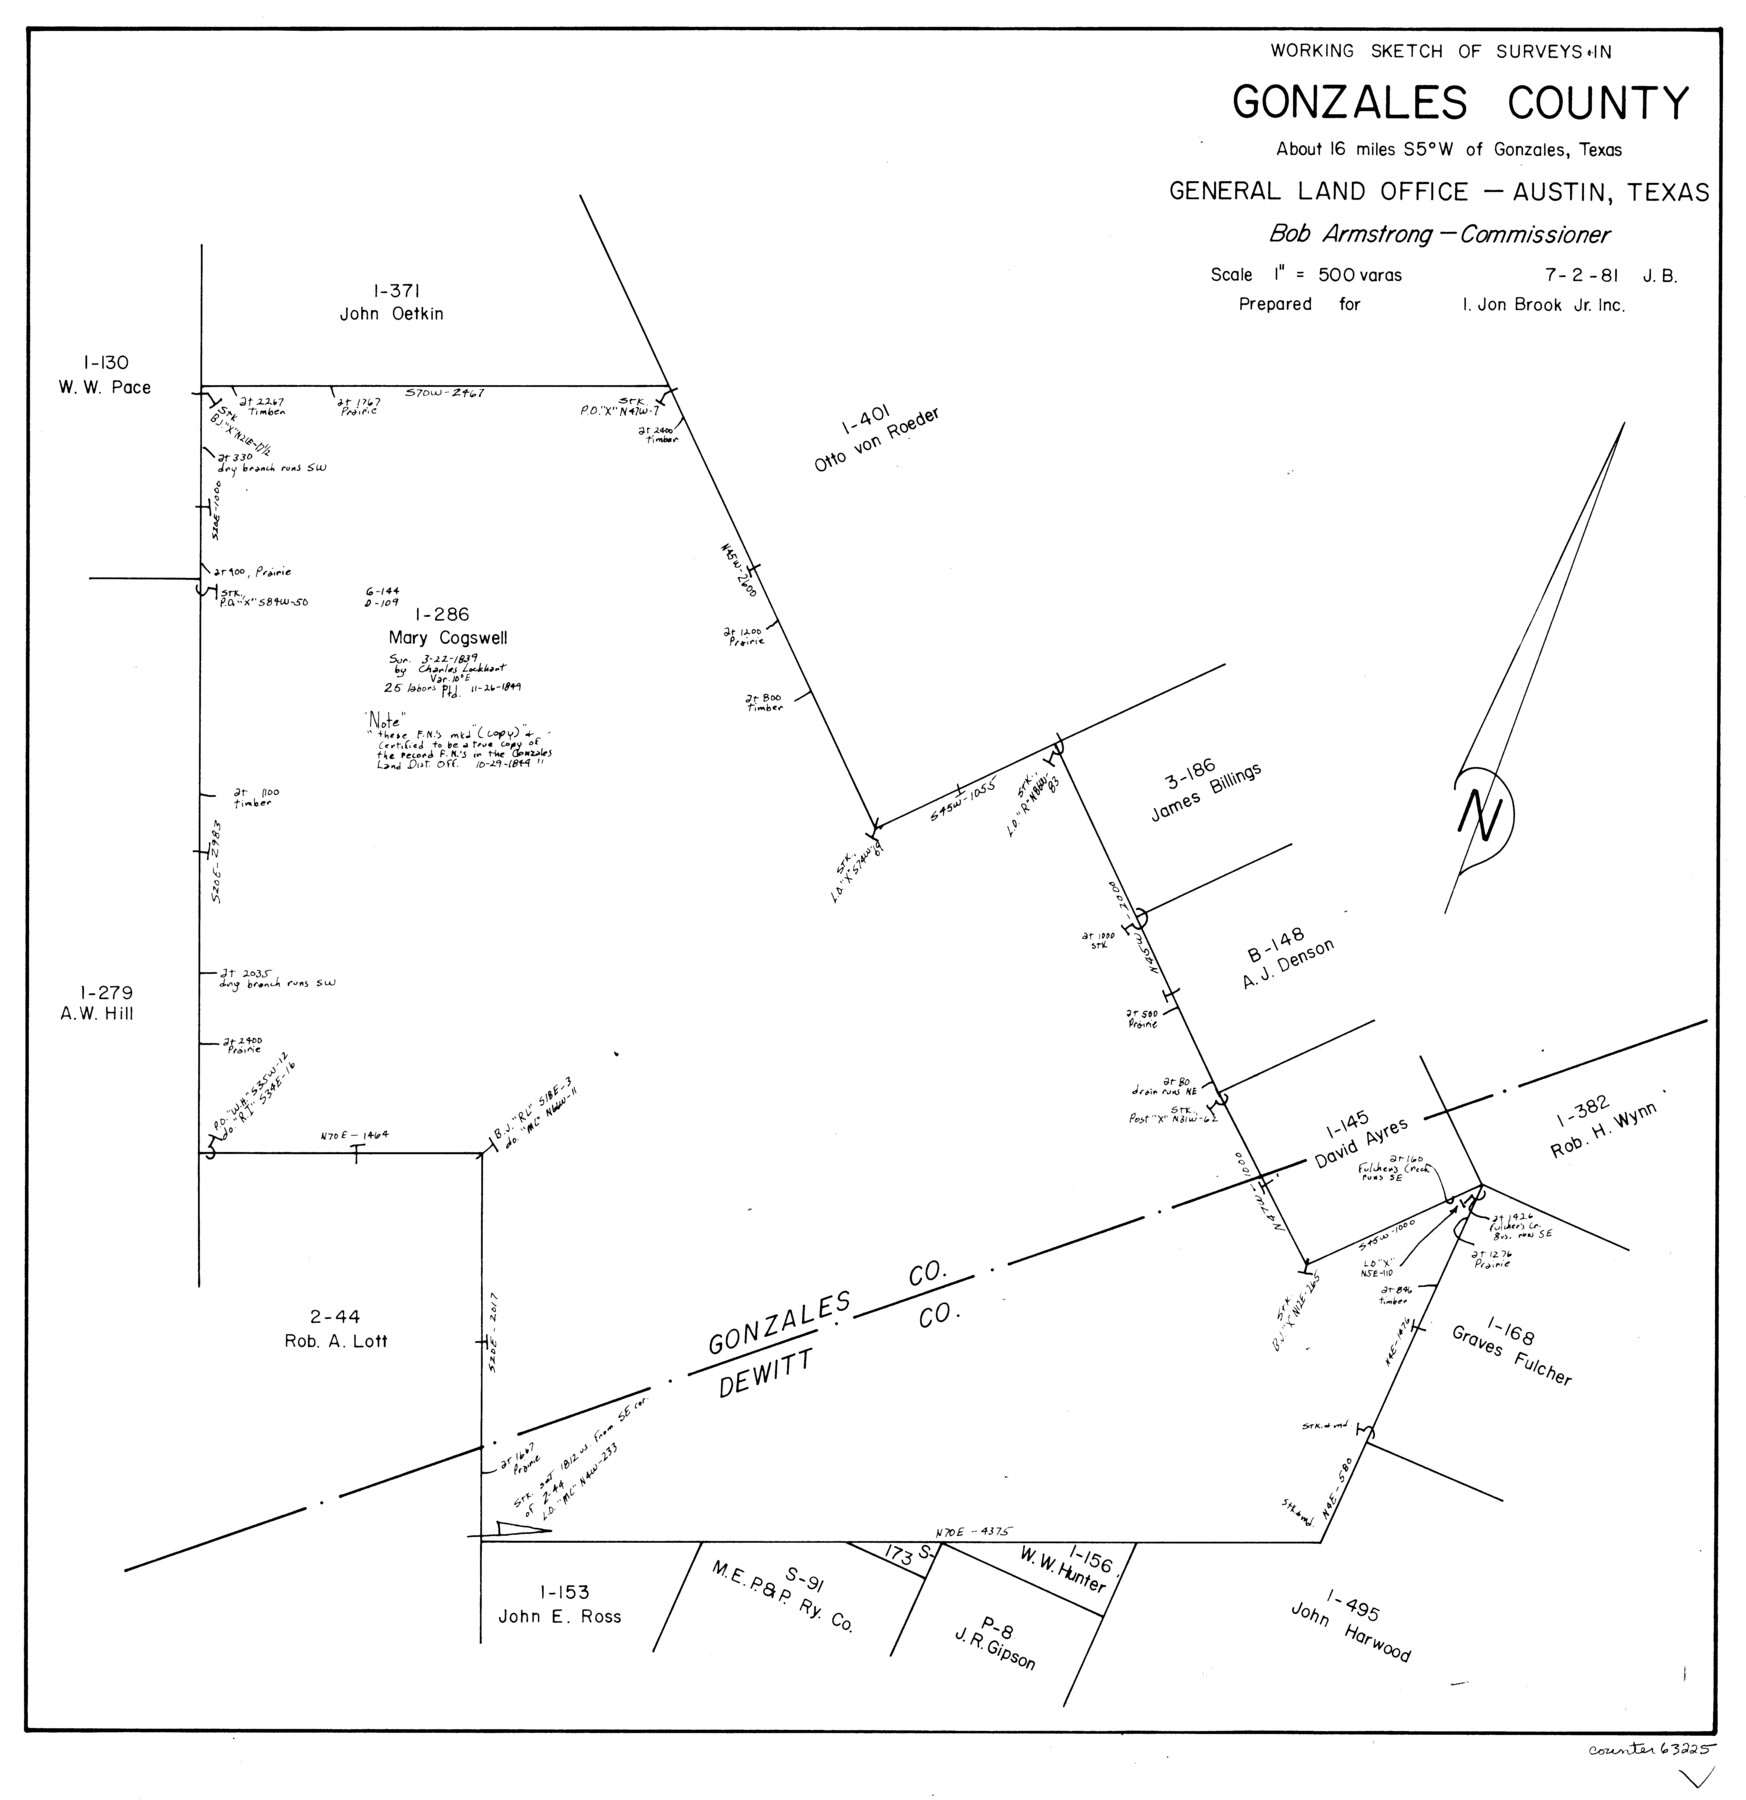 63225, Gonzales County Working Sketch 9, General Map Collection